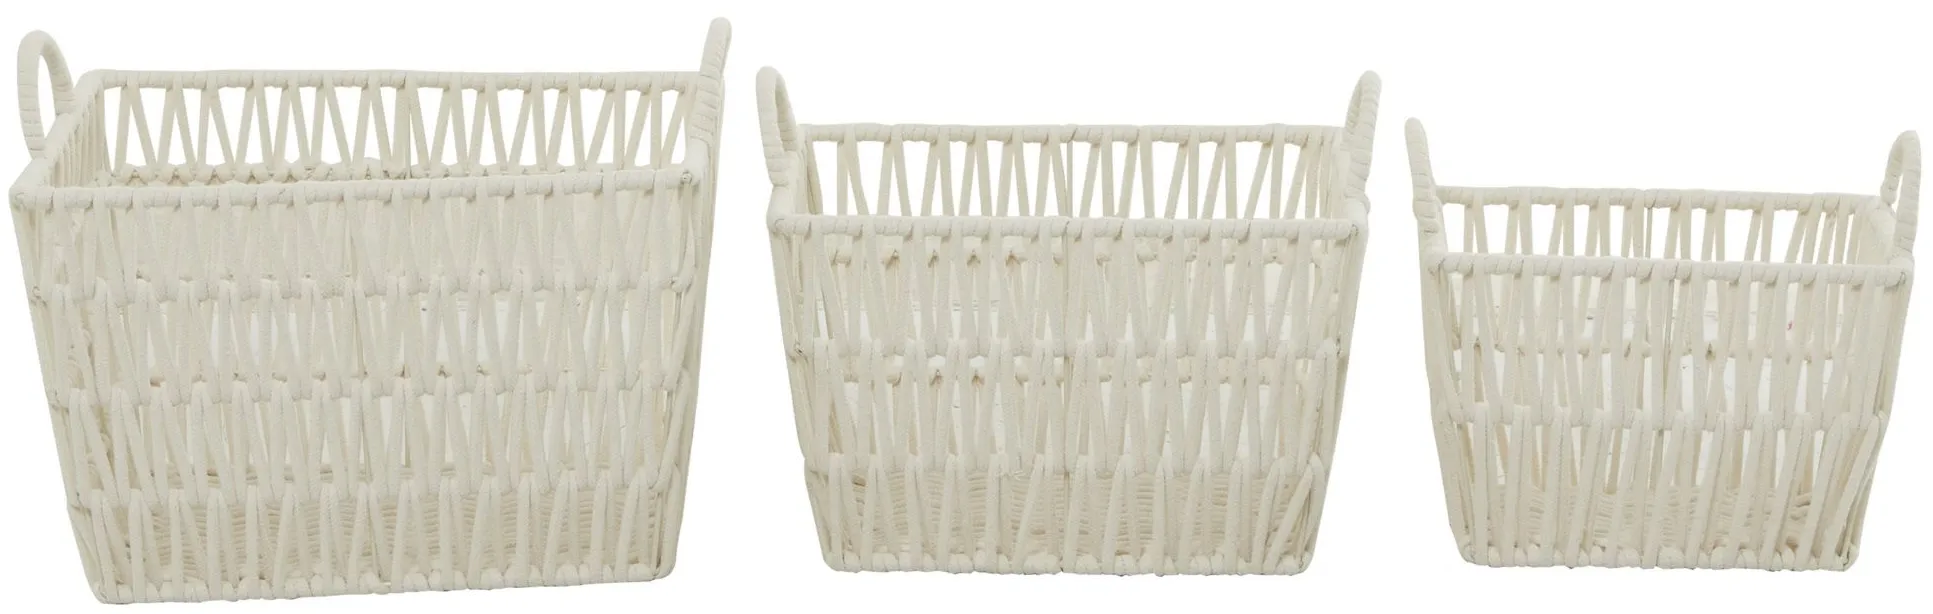 Ivy Collection Set of 3 Traditional Storage Baskets with Handles in White by UMA Enterprises